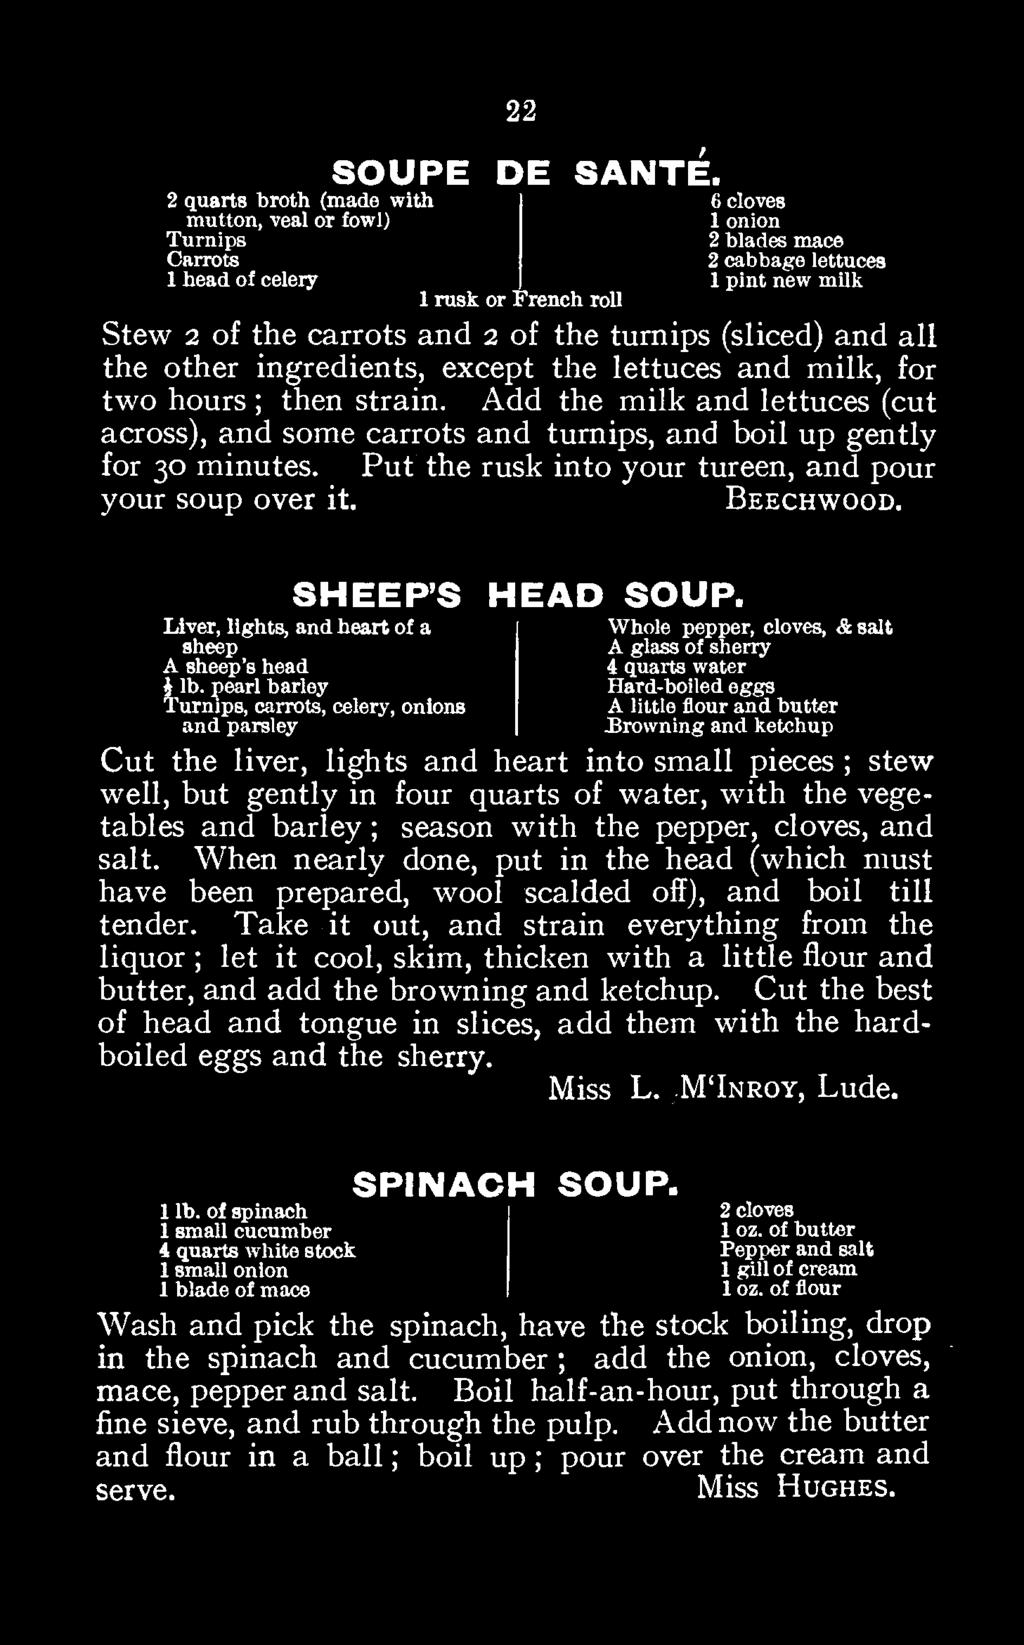 sheep s pearl head Turnips, carrots, barley 4 A quarts glass of water sherry and paisley celery, onions Hard-boiled A little flour eggs Browning and and ketchup butter Cut the liver, lights and heart